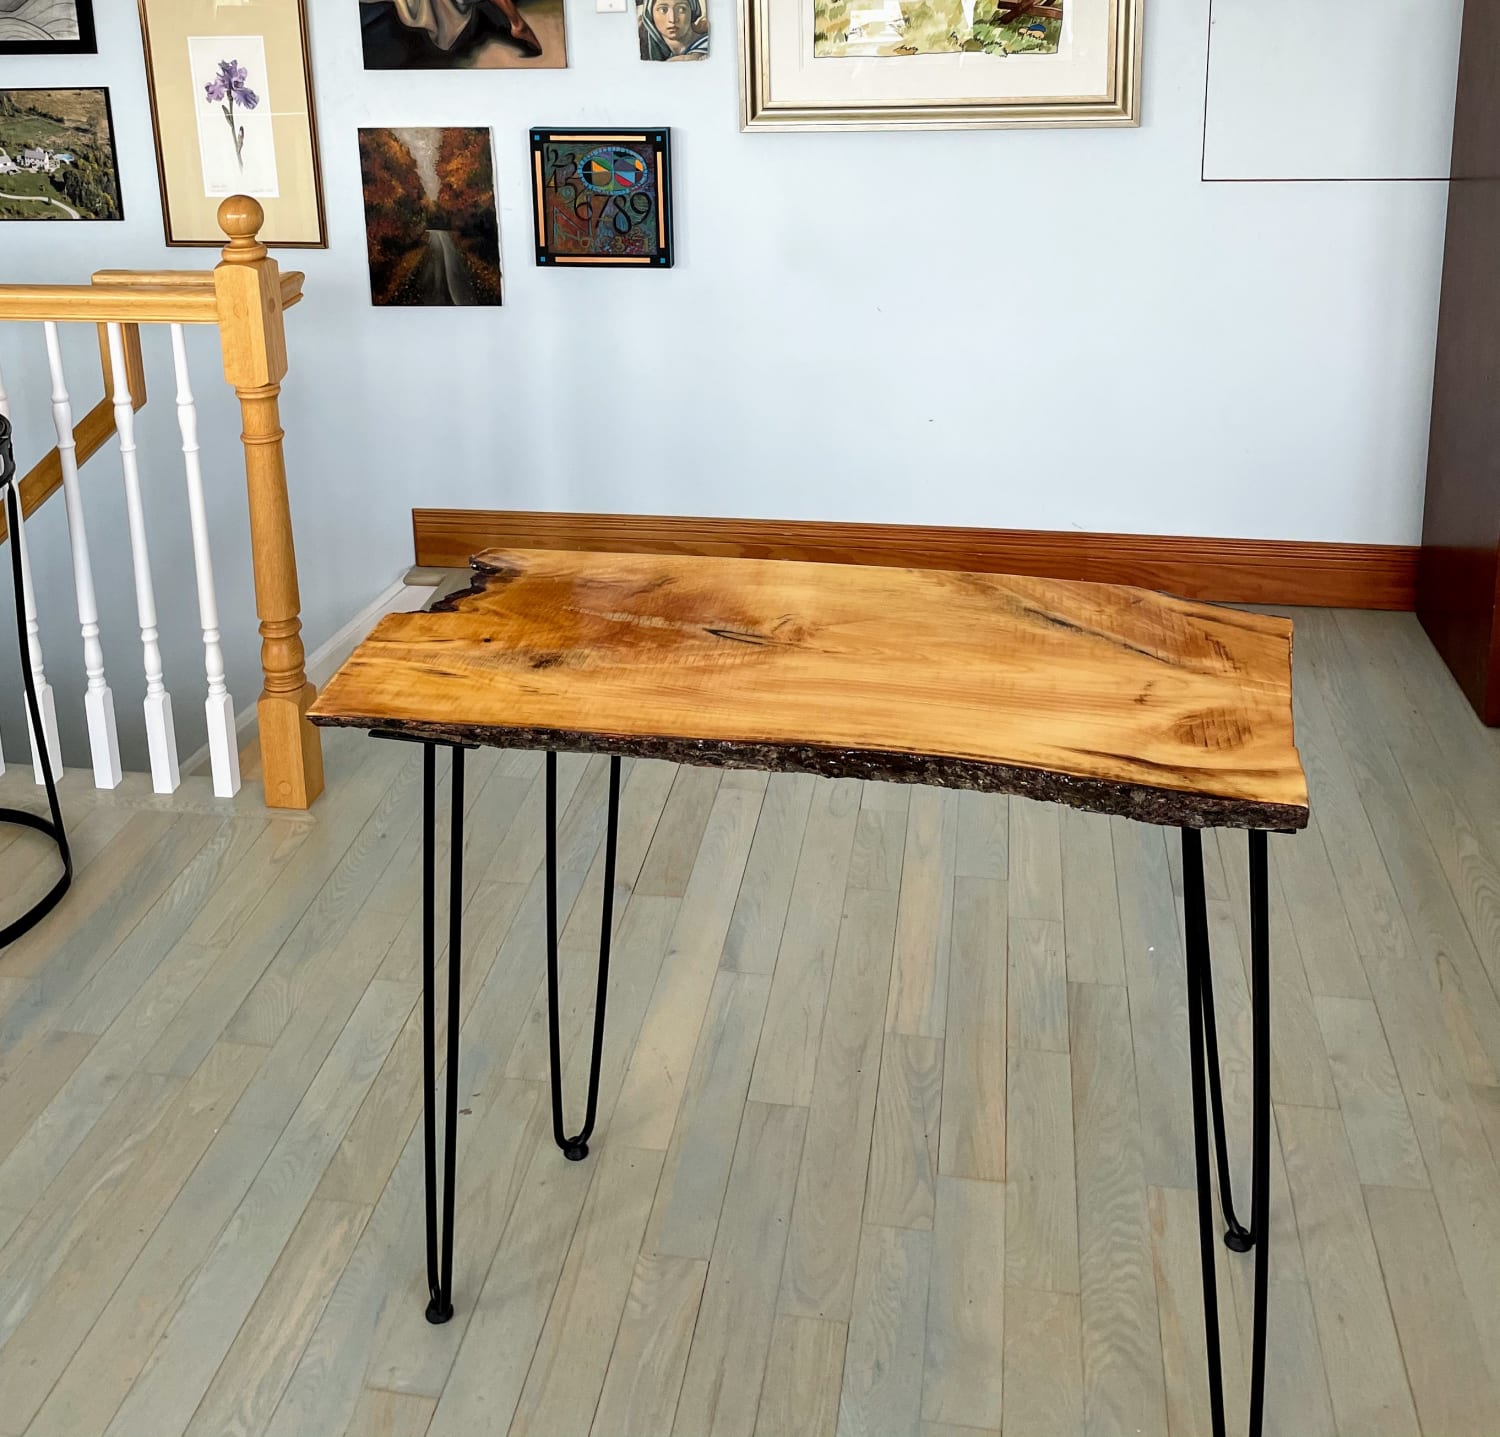 Building a small live edge epoxy finished desk, with metal hairpin legs.